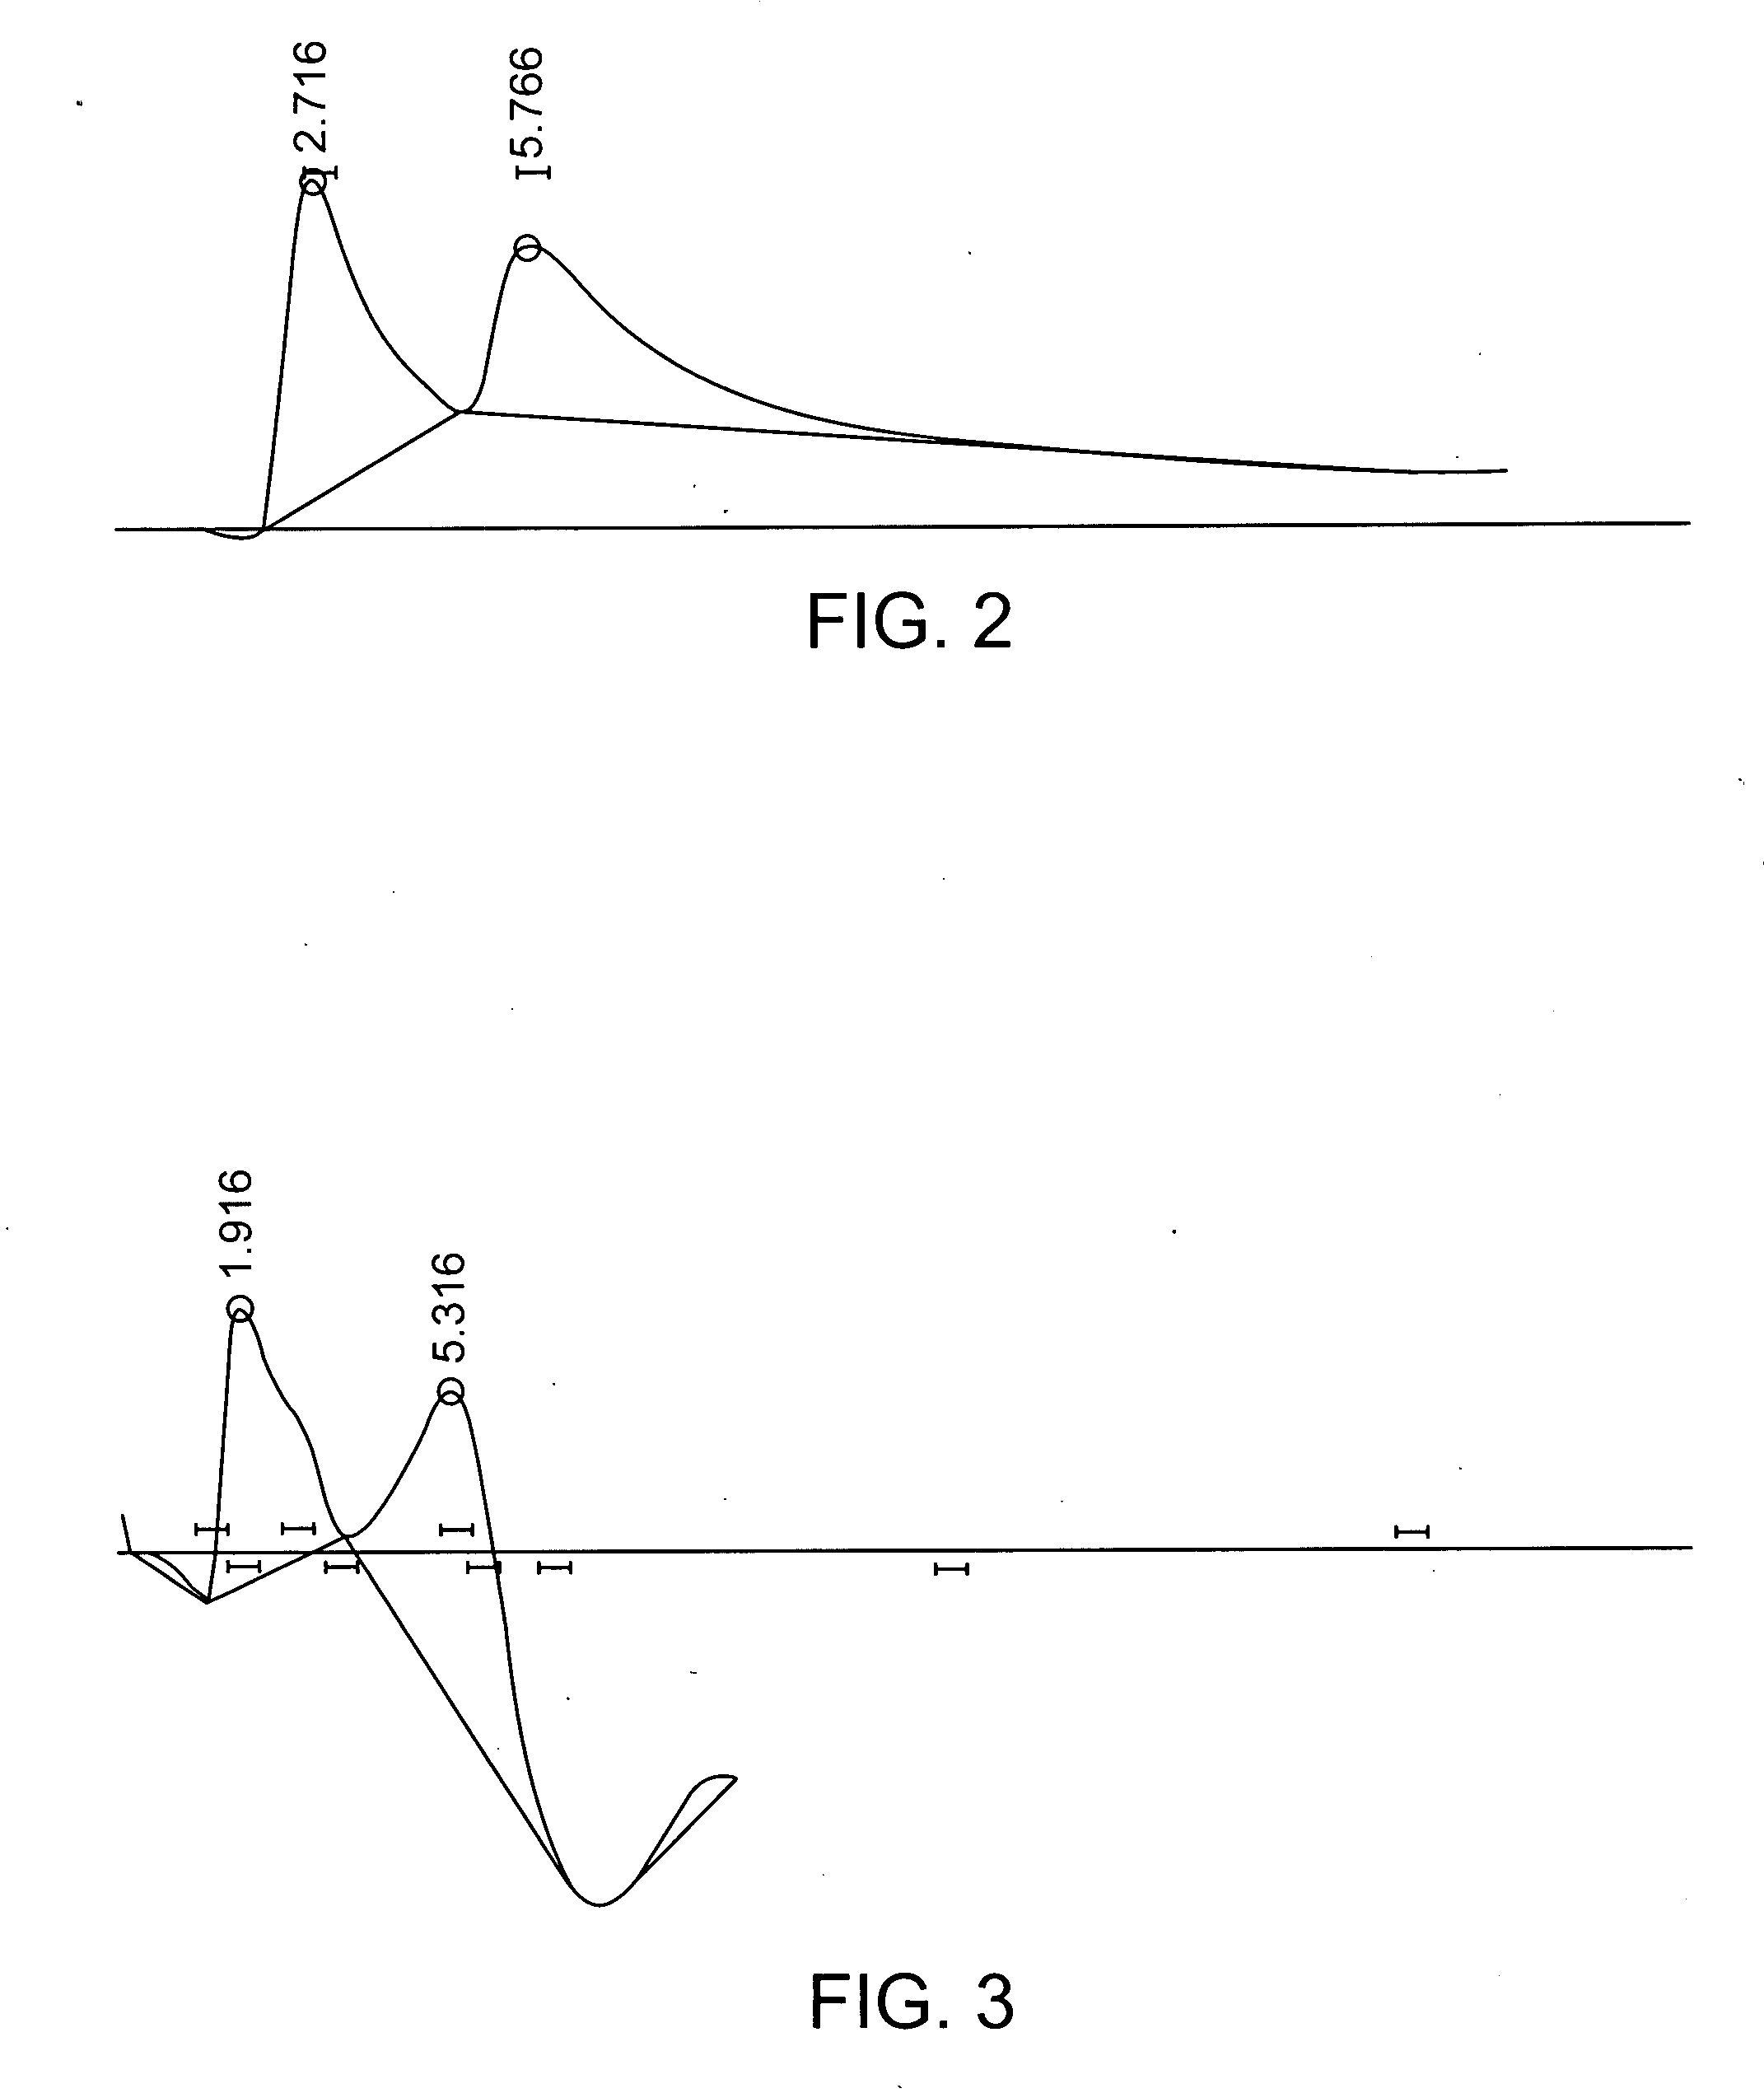 Production of chiral materials using crystallization inhibitors